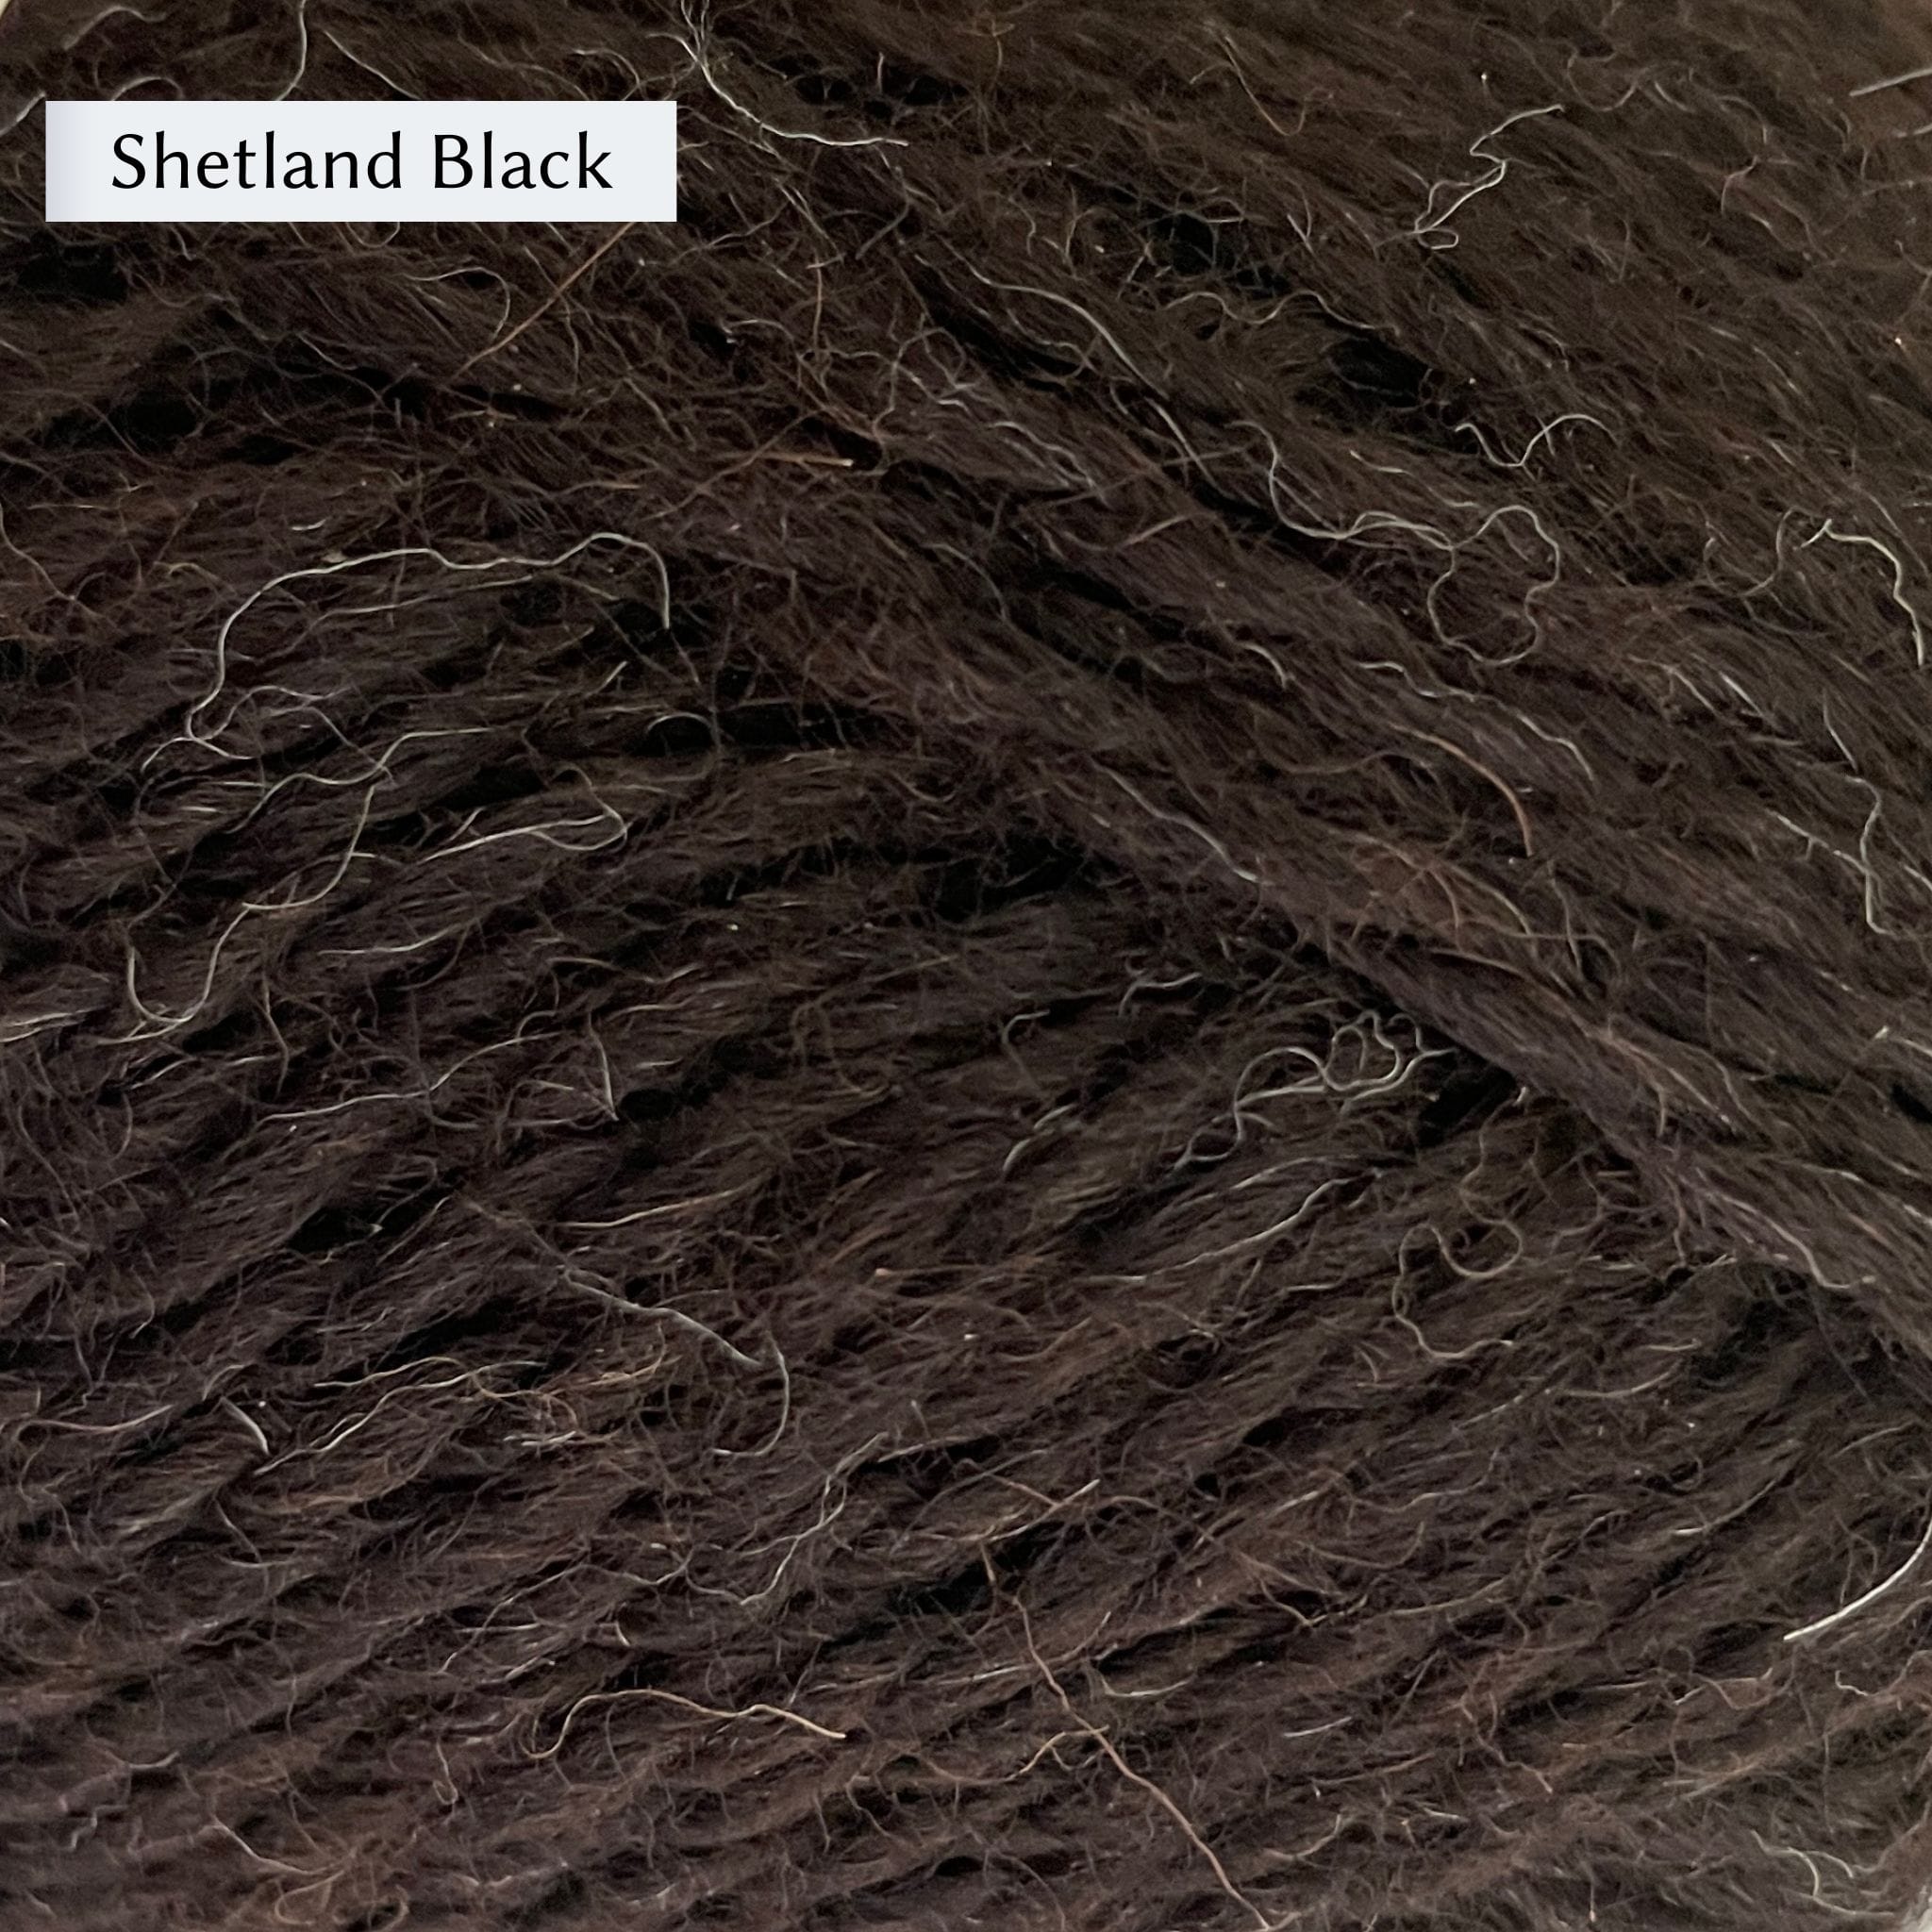 Jamieson & Smith Aran Worsted Yarn close up photo of Shetland Black Colorway which is a very dark brown color.